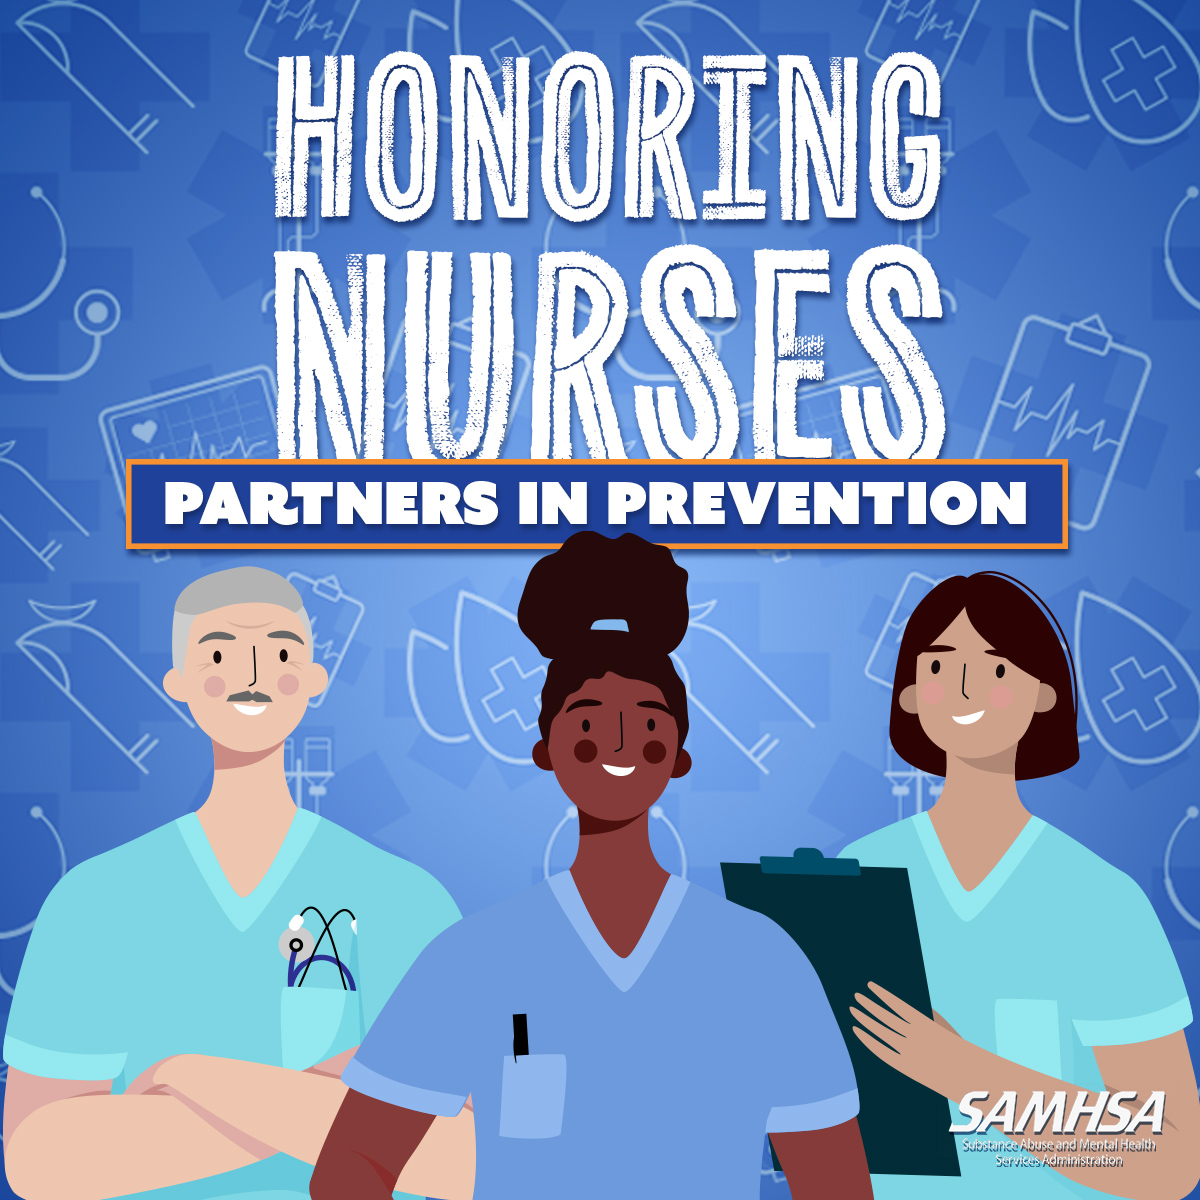 Happy #NursesWeek and #NursesMonth! Thank you to nurses for making a difference in substance use and misuse prevention, mental health promotion, treatment & recovery. #NursesMakeTheDifference #MHAM #PartnersInPrevention